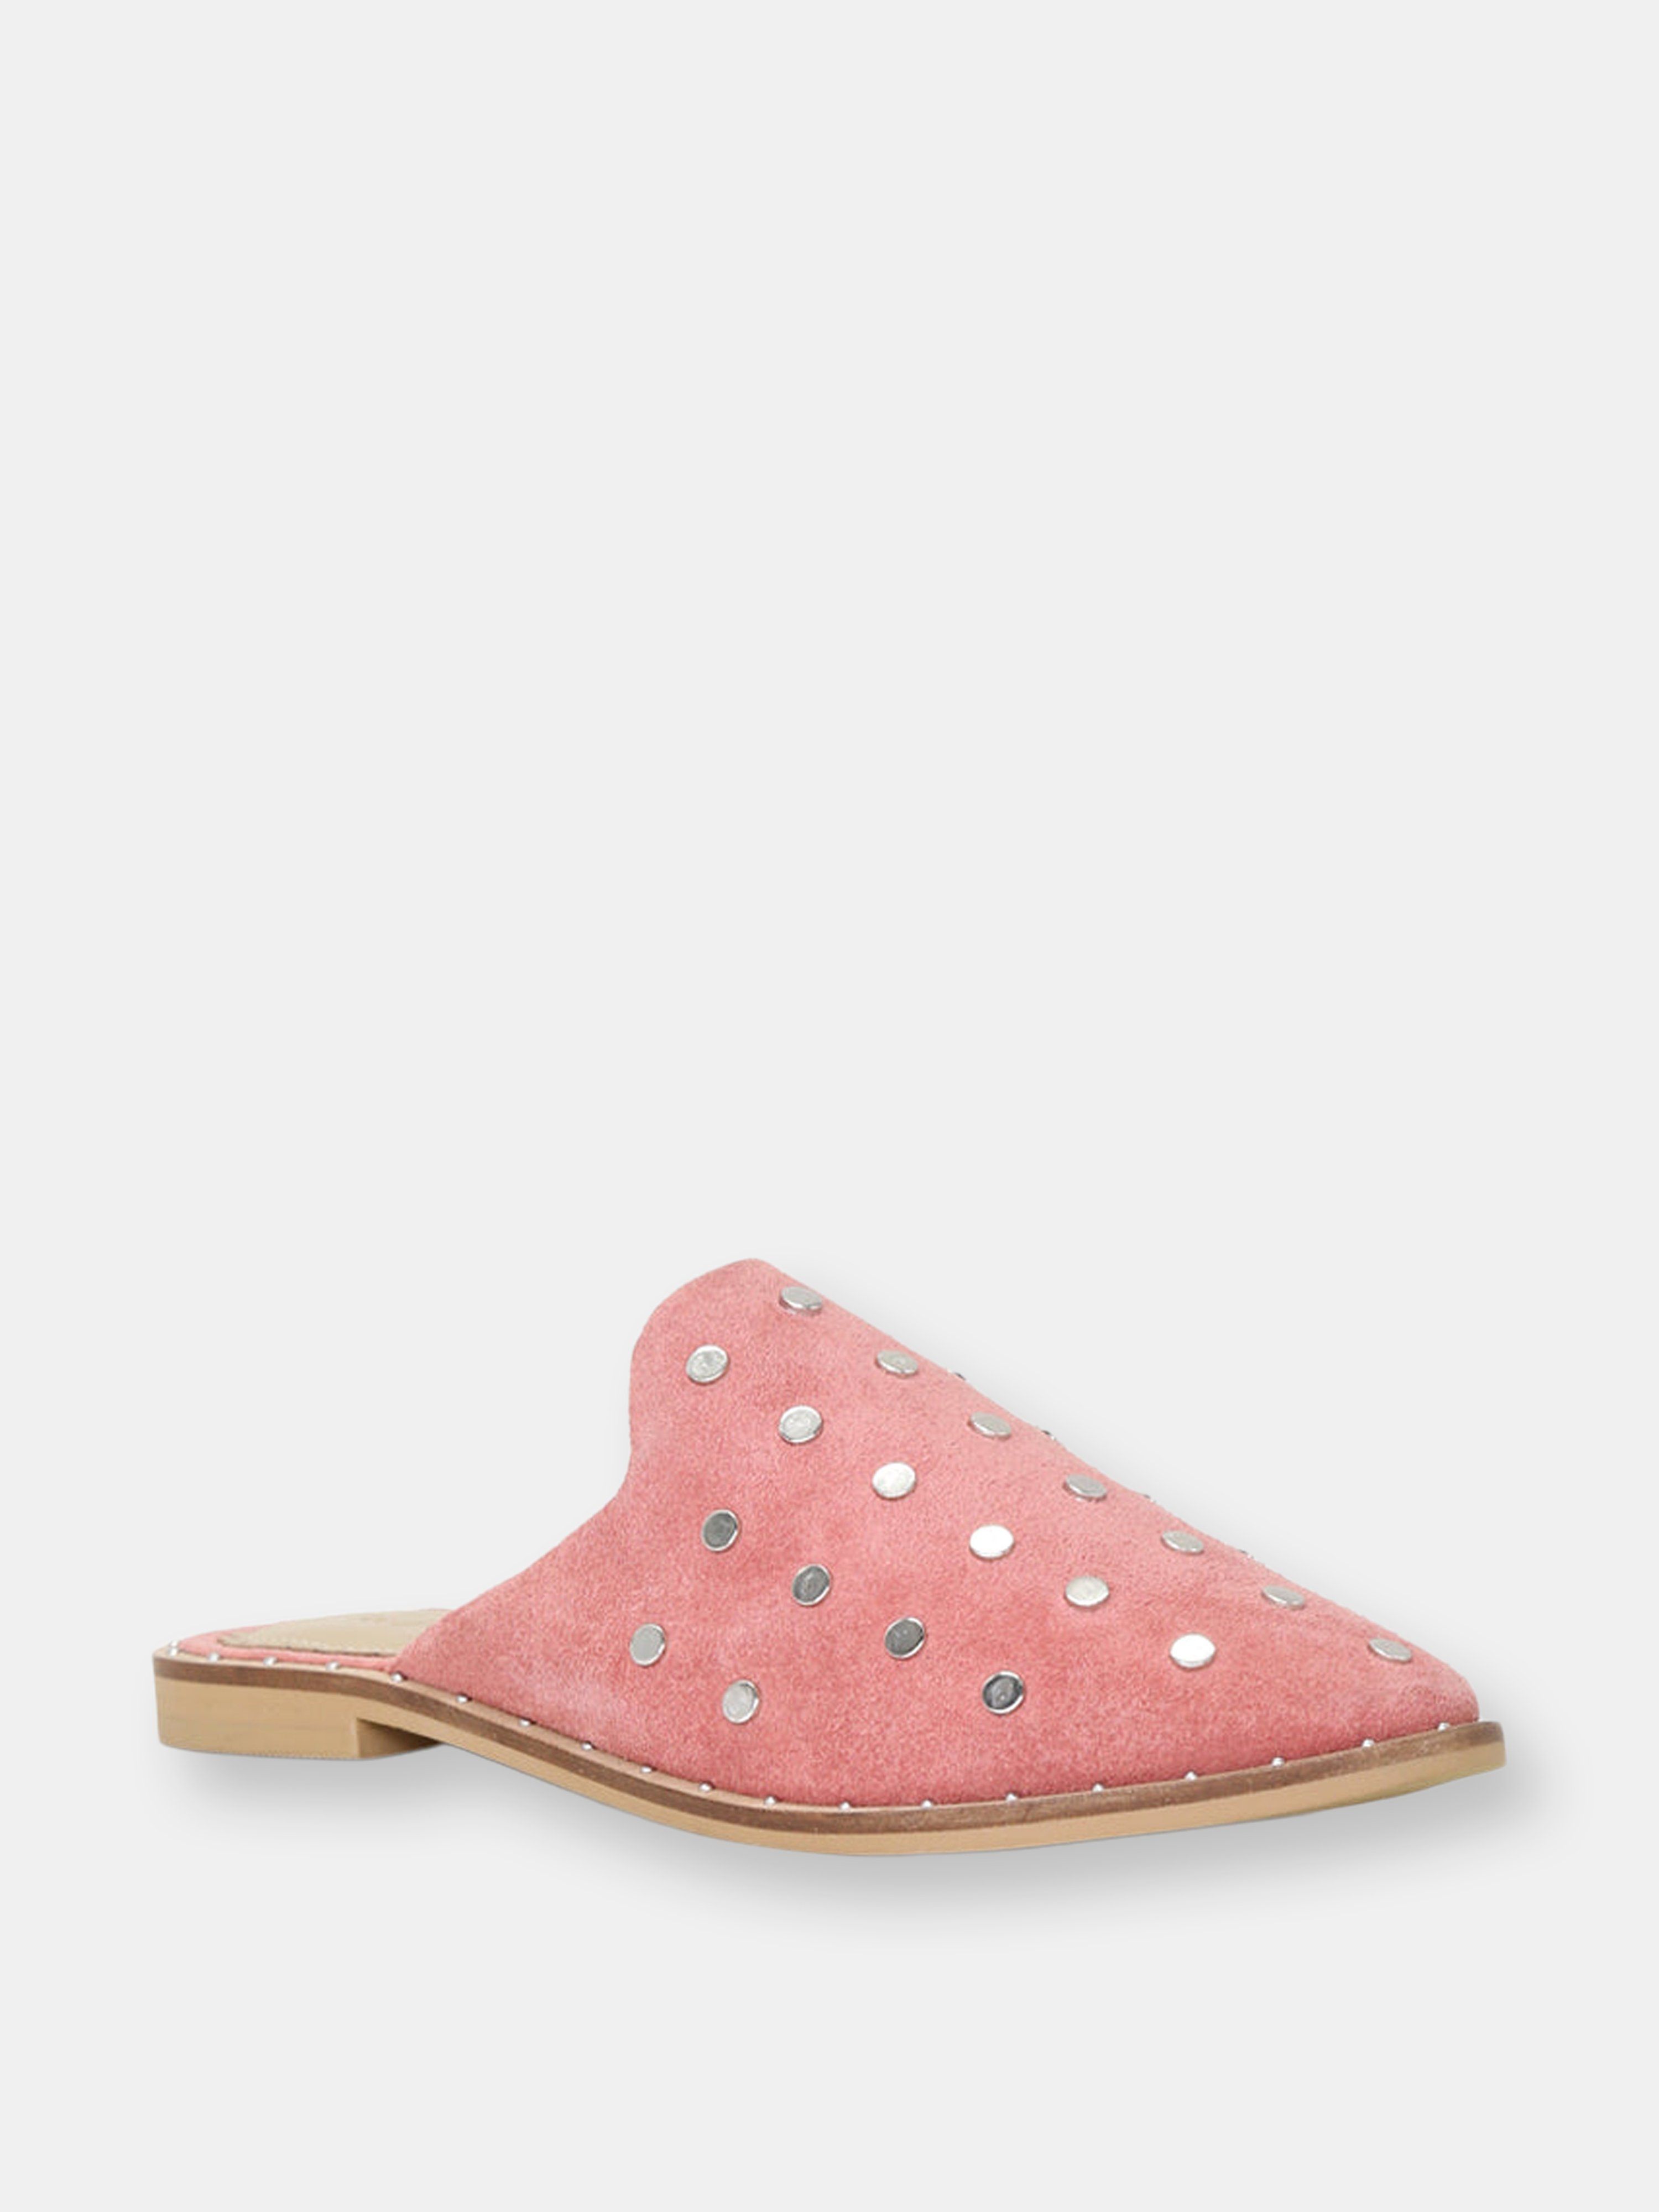 Jodie Dusty Pink Studded Leather Mule - US 6 - Also in: US 7, US 5 | Verishop